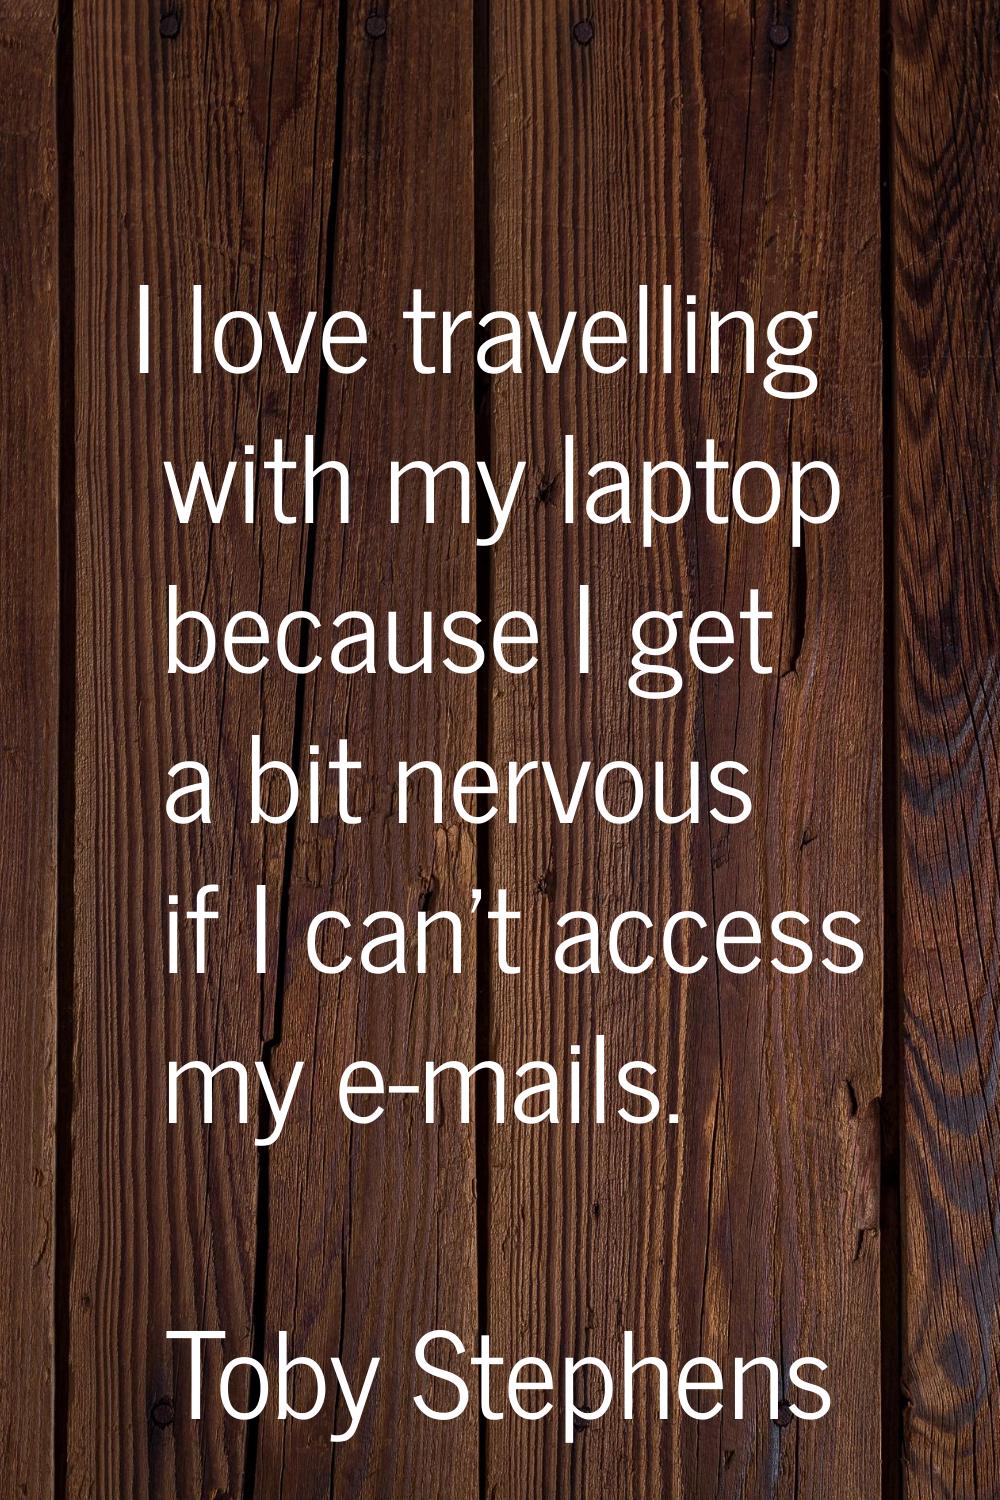 I love travelling with my laptop because I get a bit nervous if I can't access my e-mails.